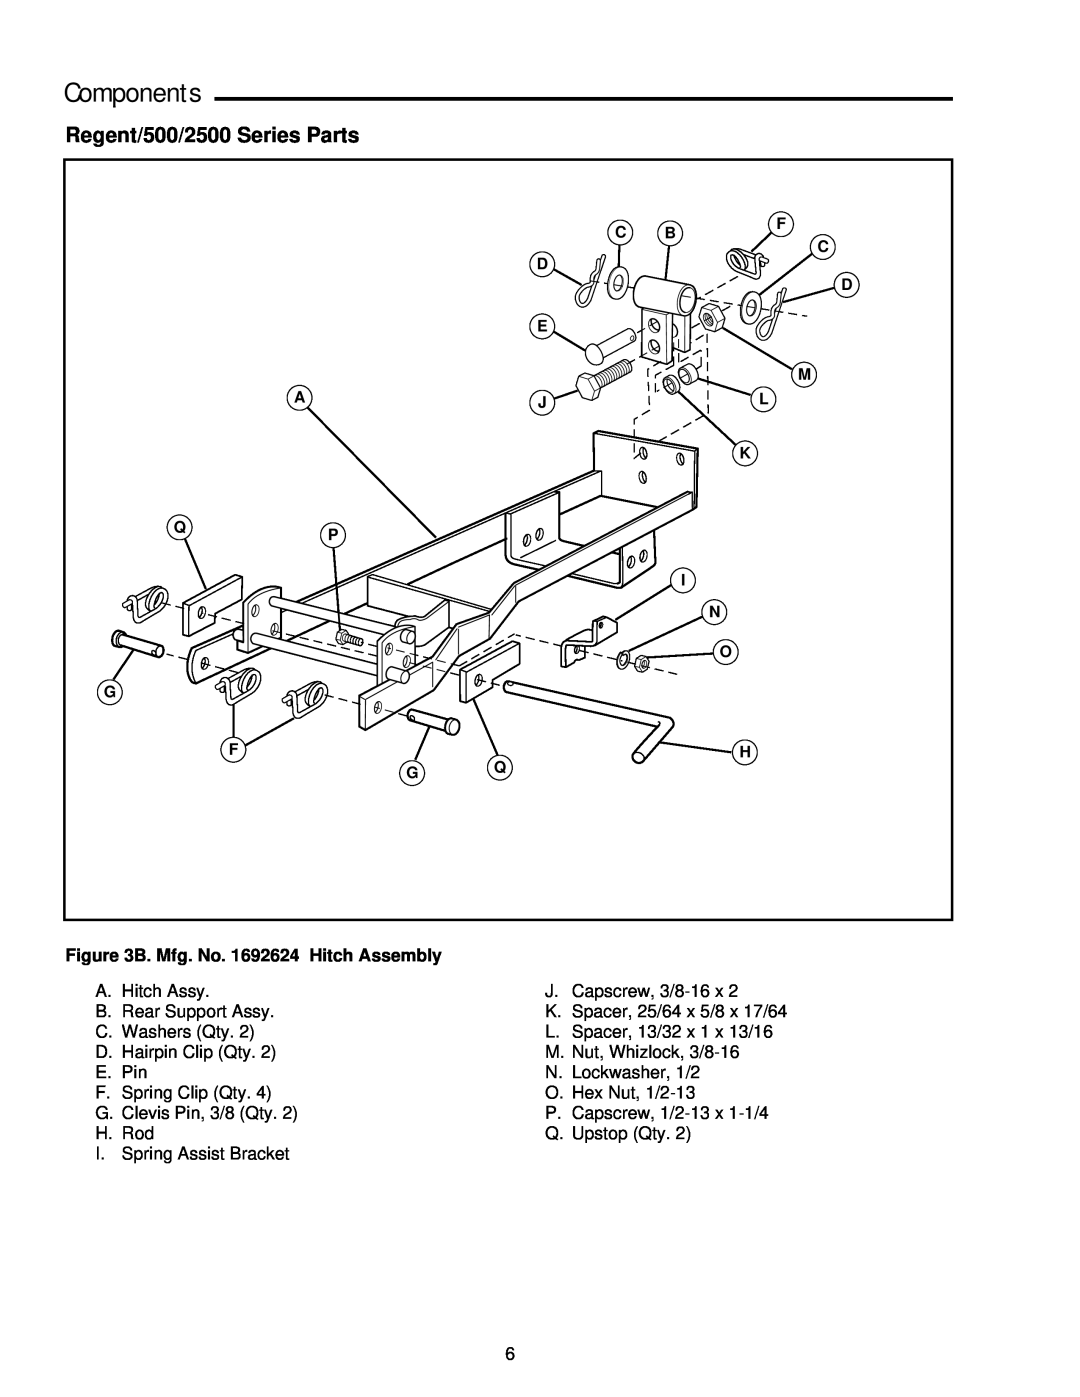 Simplicity 1691620, 1692039 manual B. Mfg. No. 1692624 Hitch Assembly, Components, Regent/500/2500 Series Parts 